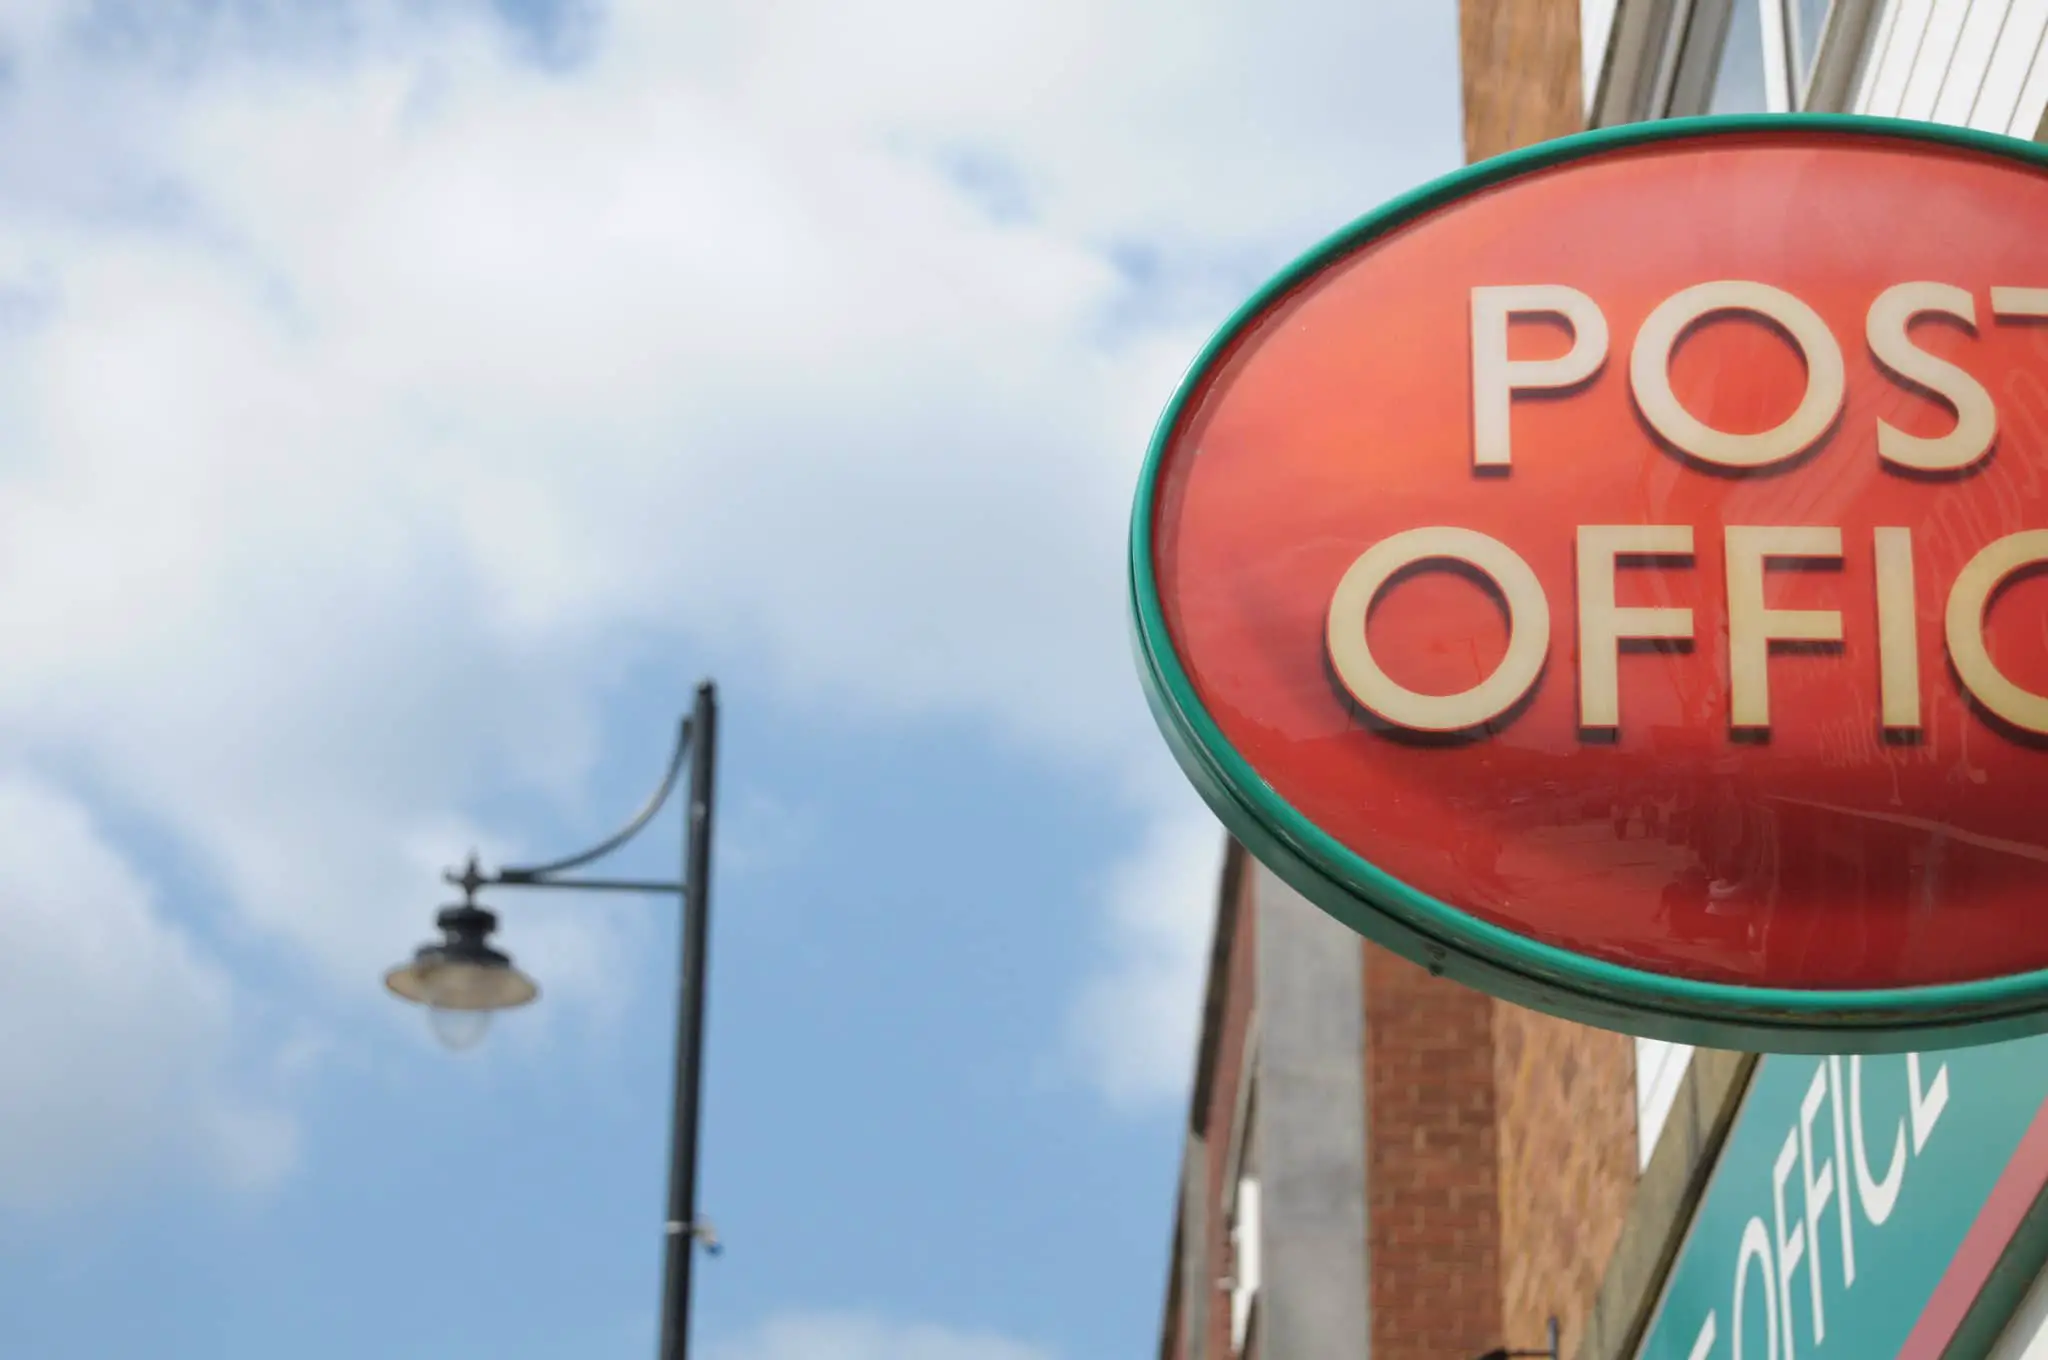 Post office sign on side of building